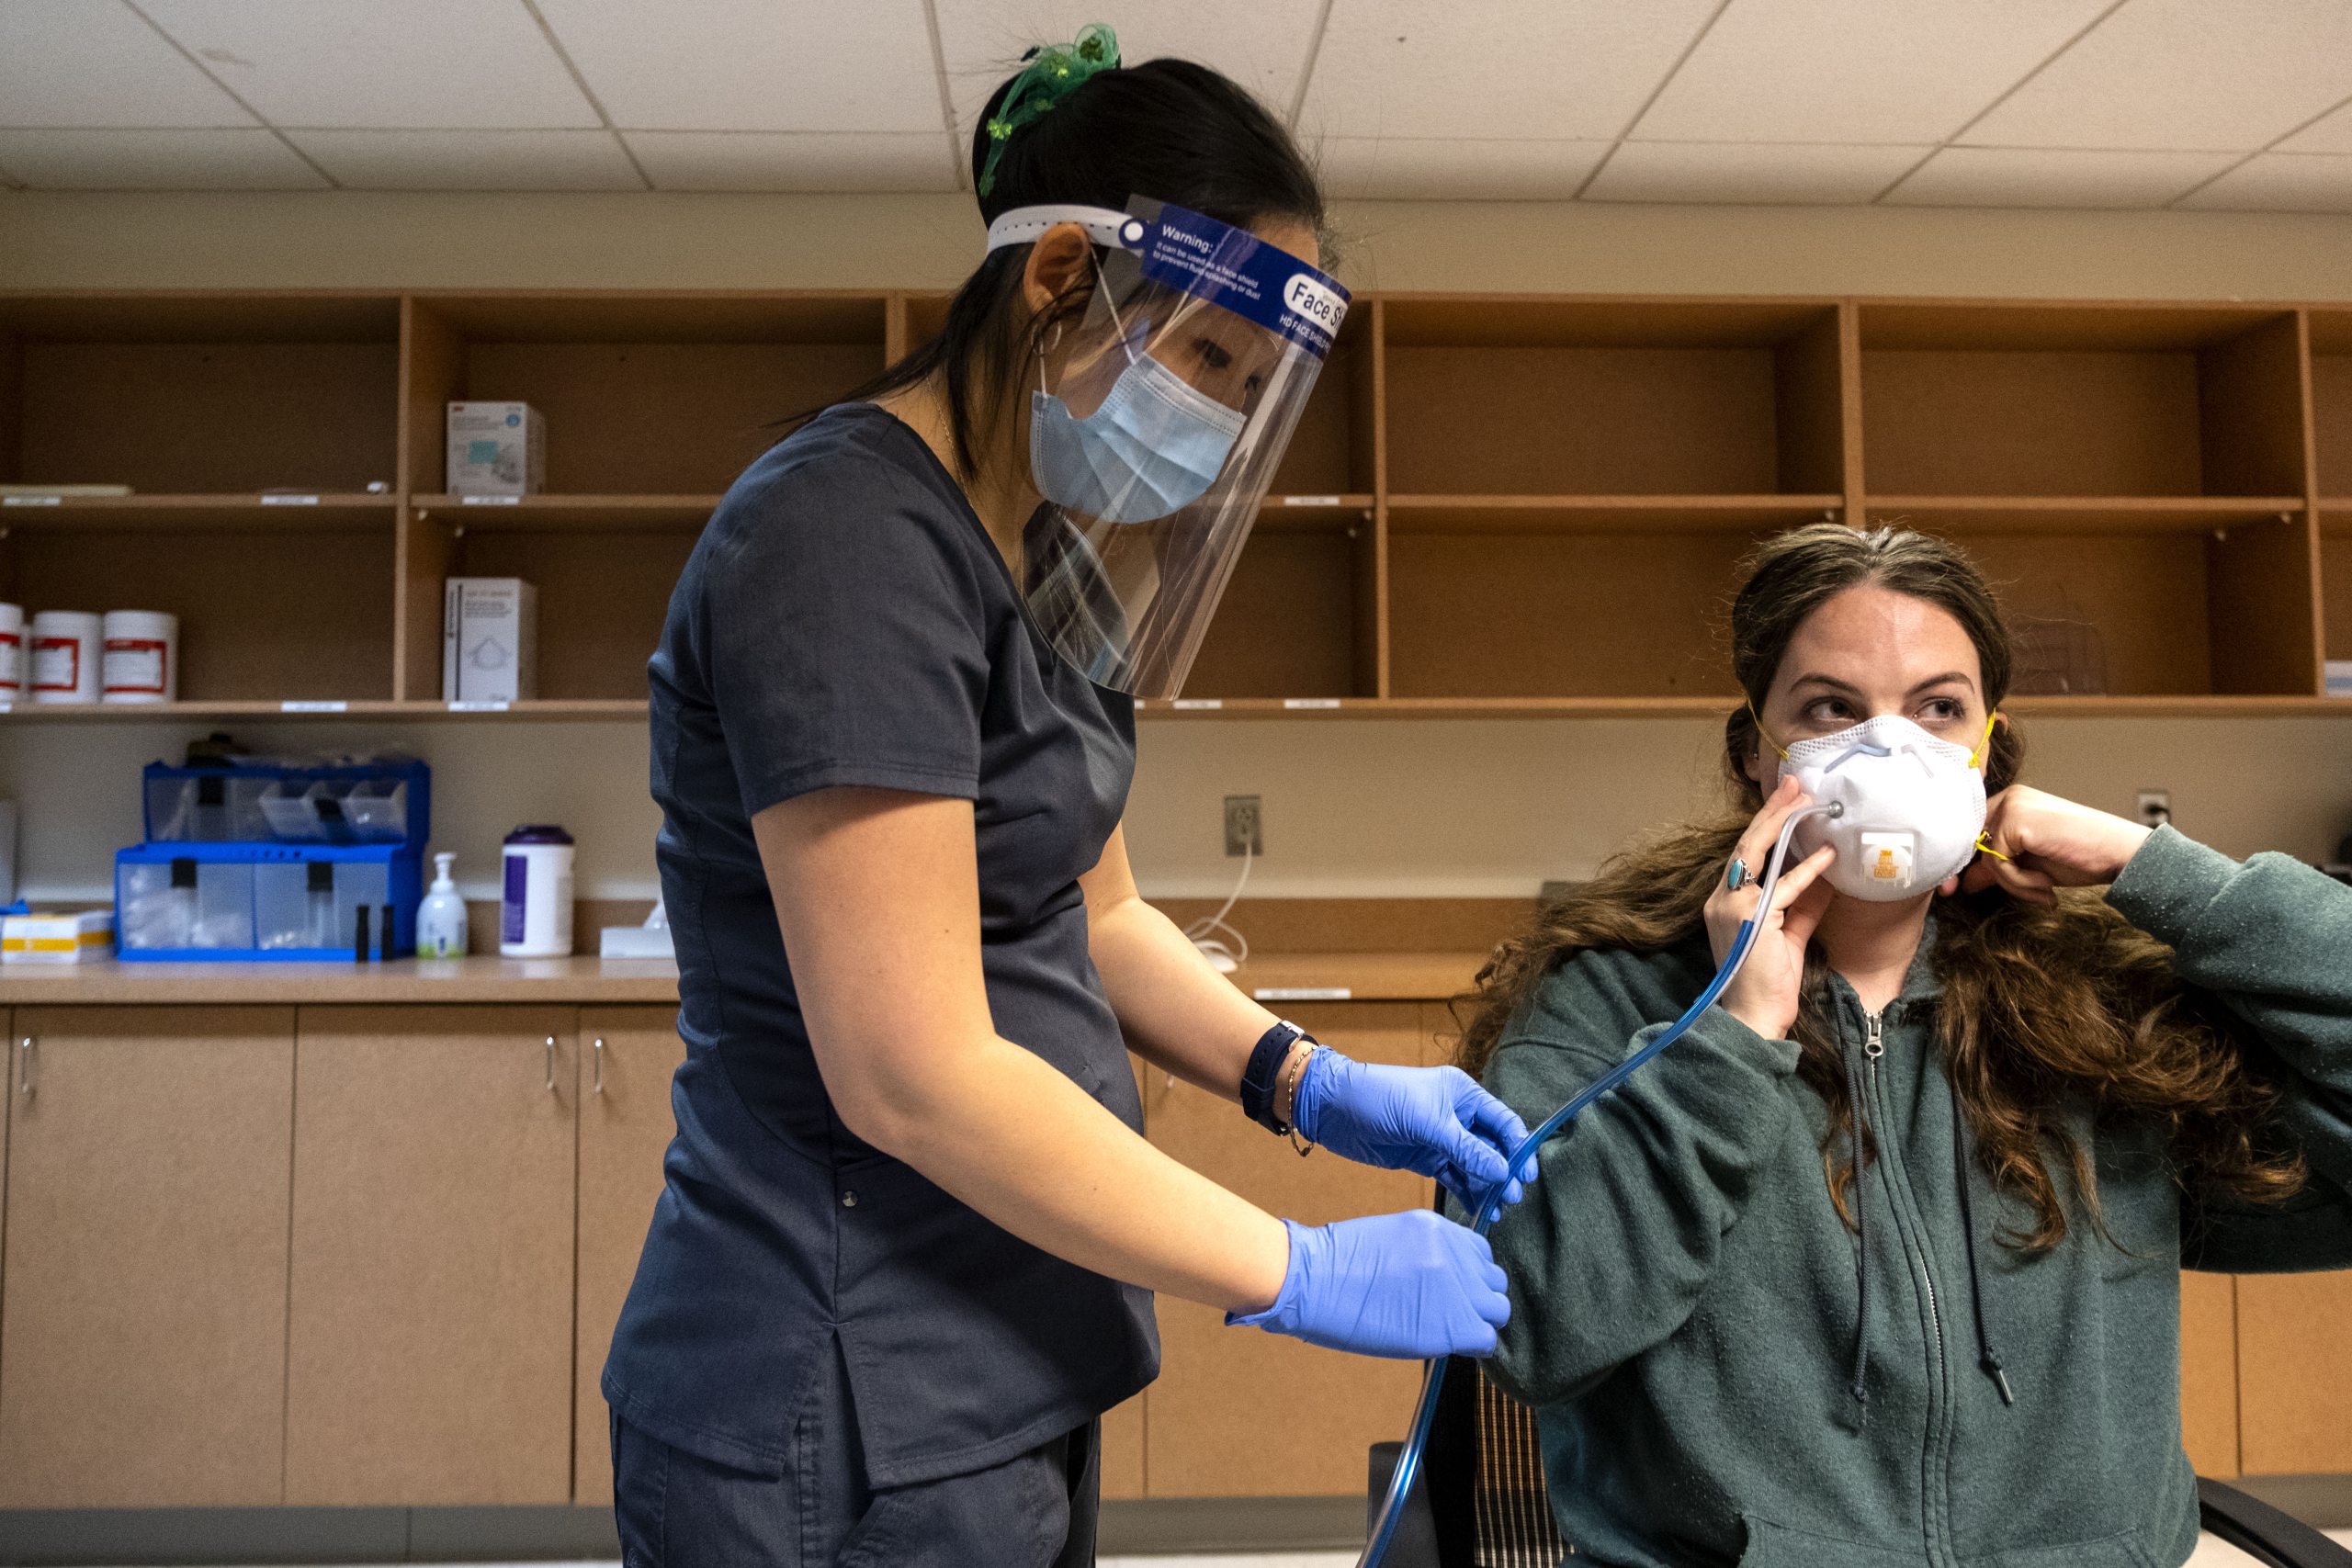 In full PPE, occupational health nurse Jeanne Brueggemann performs a routine mask fit test on Chelsi Holle. This was a common test at the clinic before mask-wearing became the new normal. (Jon Gardiner/UNC-Chapel Hill)